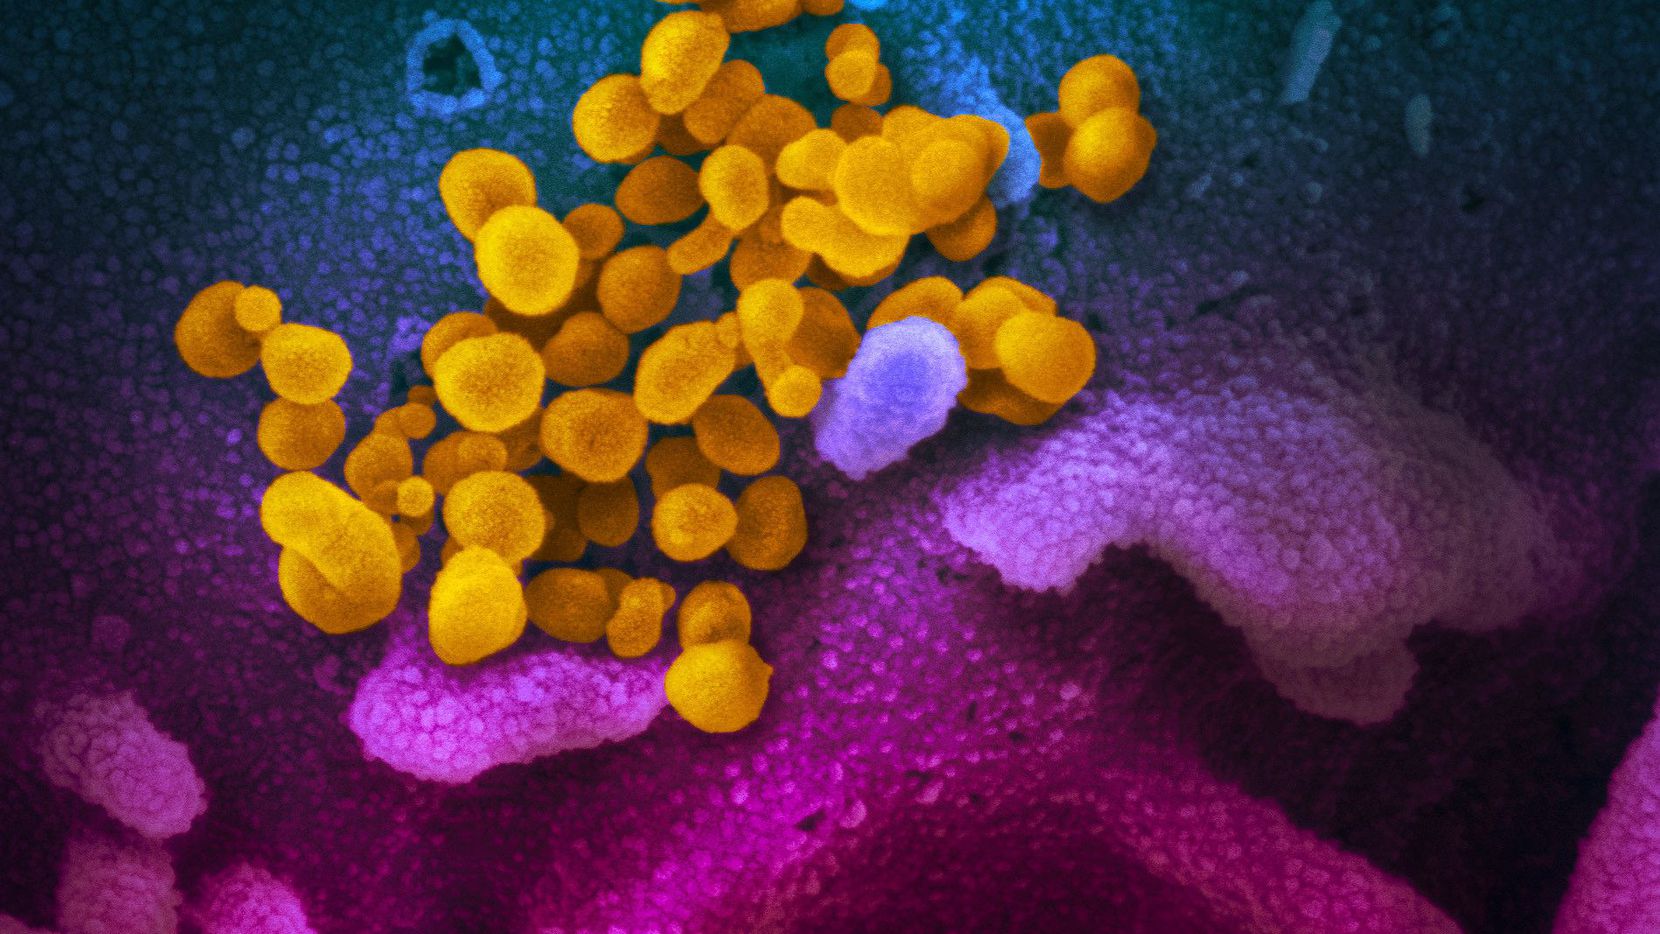 This image courtesy of the National Institutes of Health shows SARS-CoV-2, also known as 2019-nCoV, the virus that causes COVID-19.